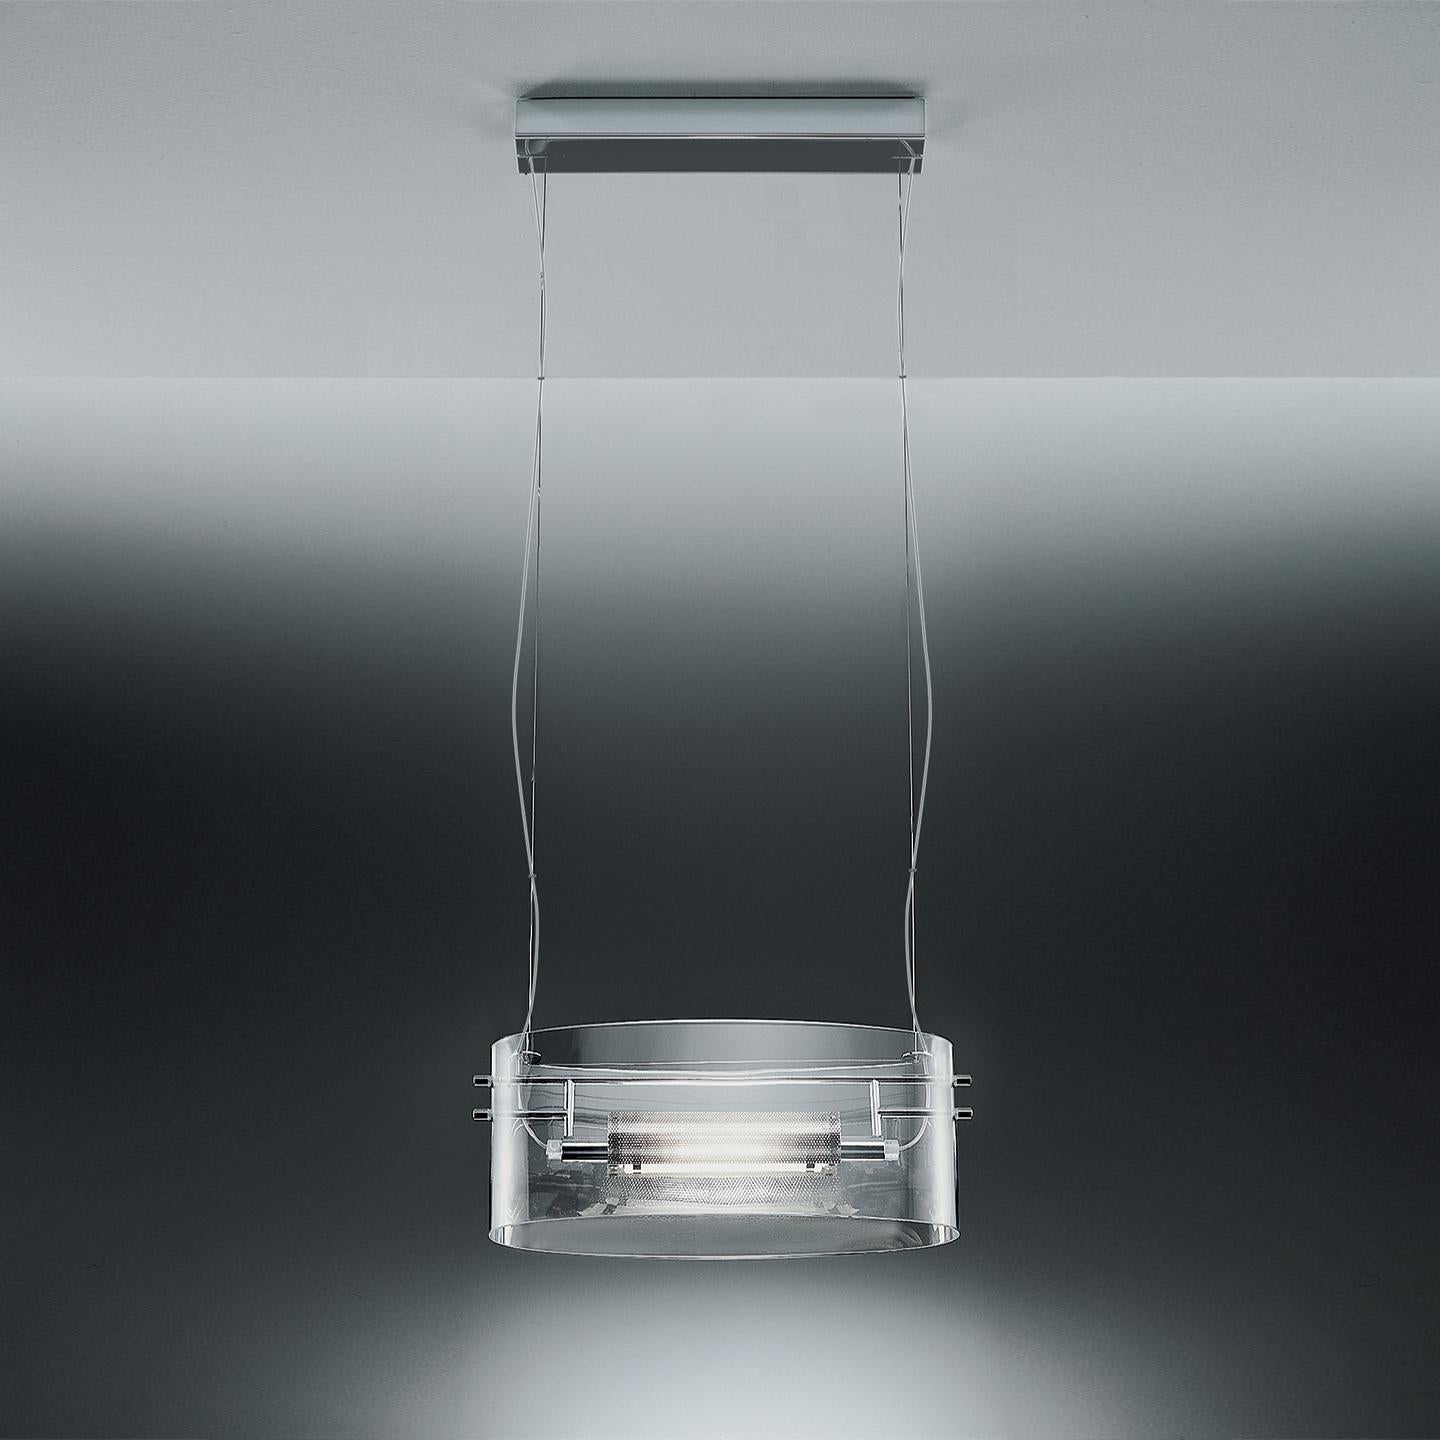 The Vittoria pendant is an icon of Leucos design and brings a piece of history into your home or office. Vittoria was designed in 1992 by Toso, Massari & Associates and has become an inspiration for creating multiple light source options from the